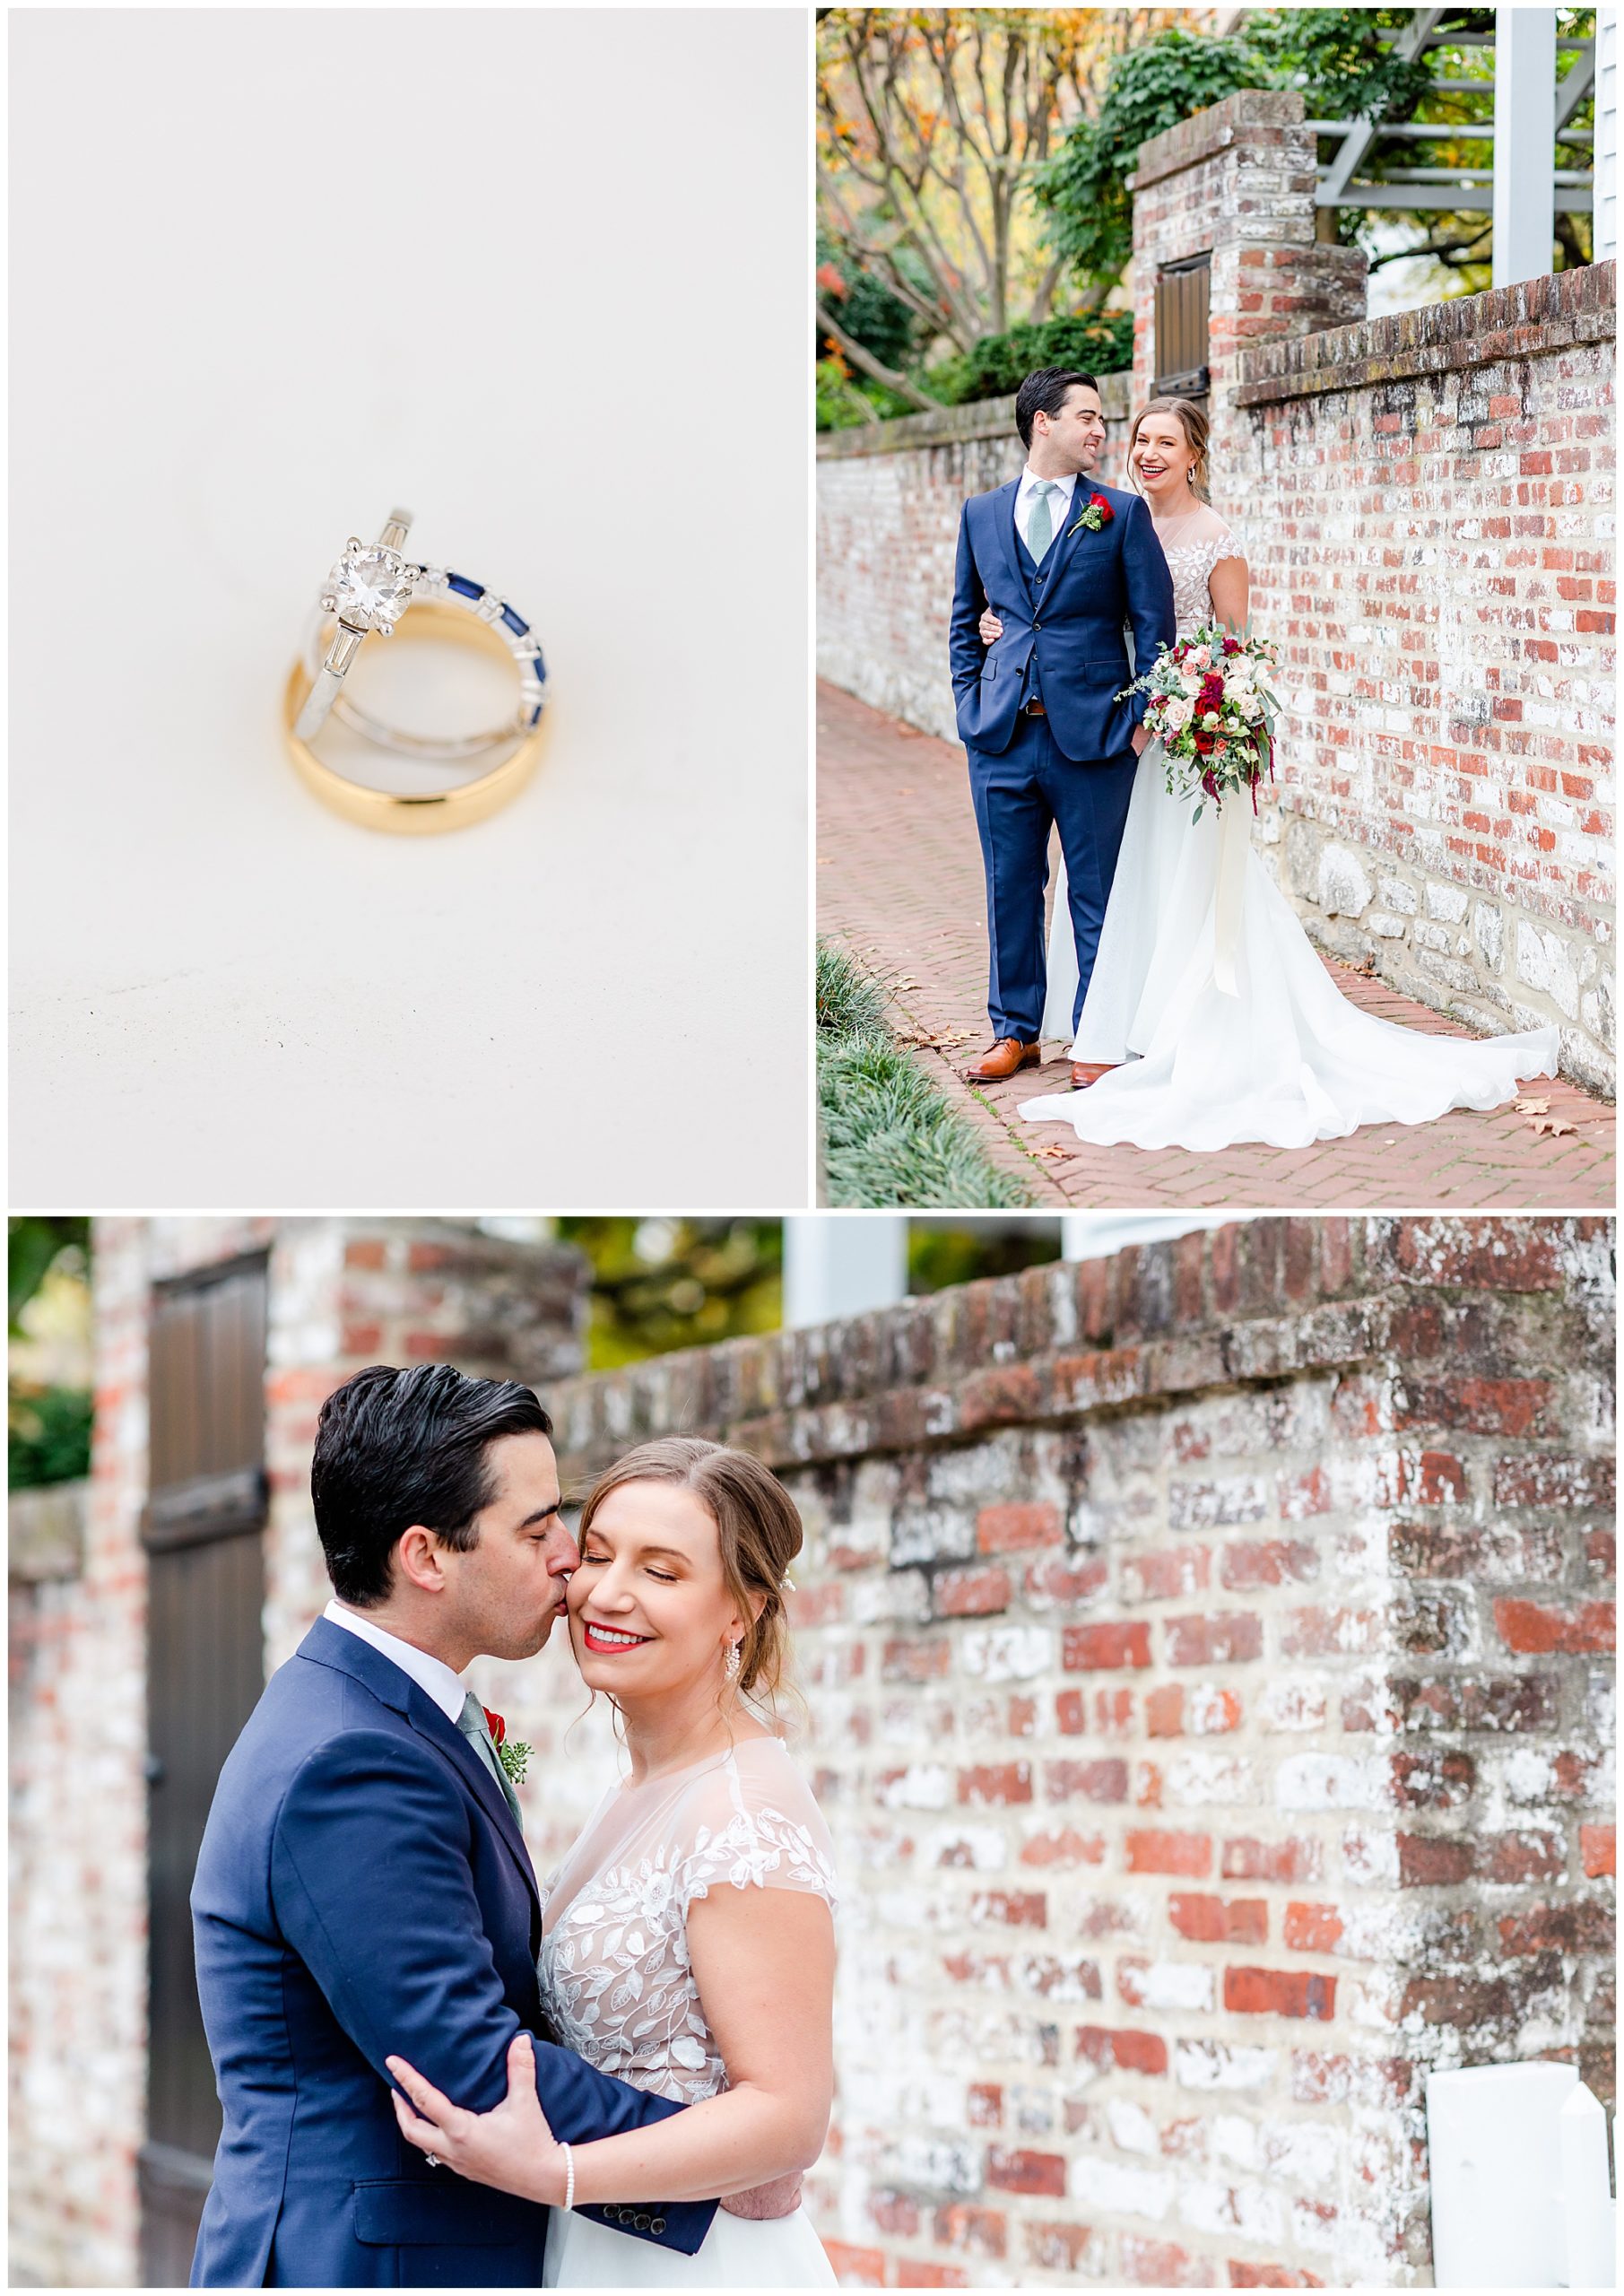 Lorien Alexandria winter wedding, Old Town Alexandria wedding, Alexandria Virginia wedding, DC micro wedding, northern Virginia wedding photographer, Alexandria Virginia wedding photographer, DC wedding photographer, winter wedding aesthetic, Rachel E.H. Photography, blue silver and gold wedding rings, groom kissing bride on cheek